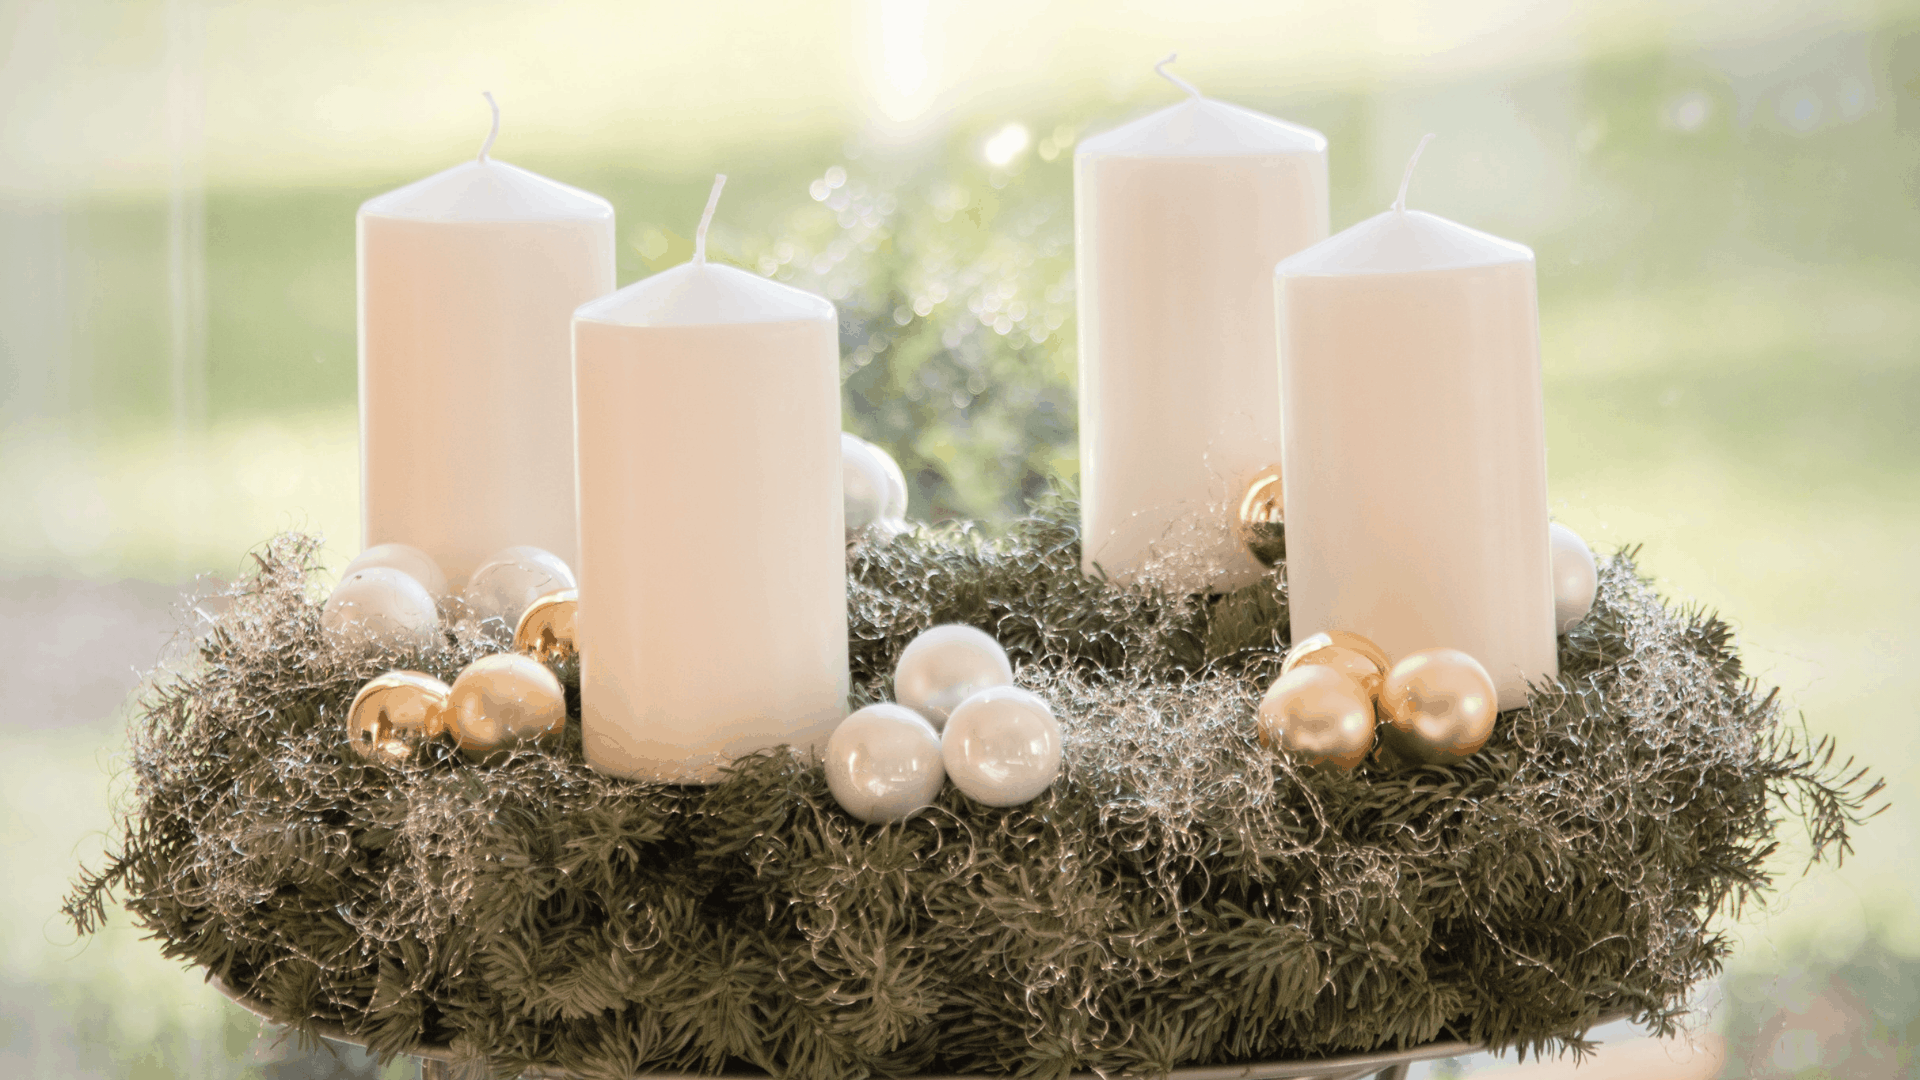 Advent Candles and Wreath used for Advent traditions.